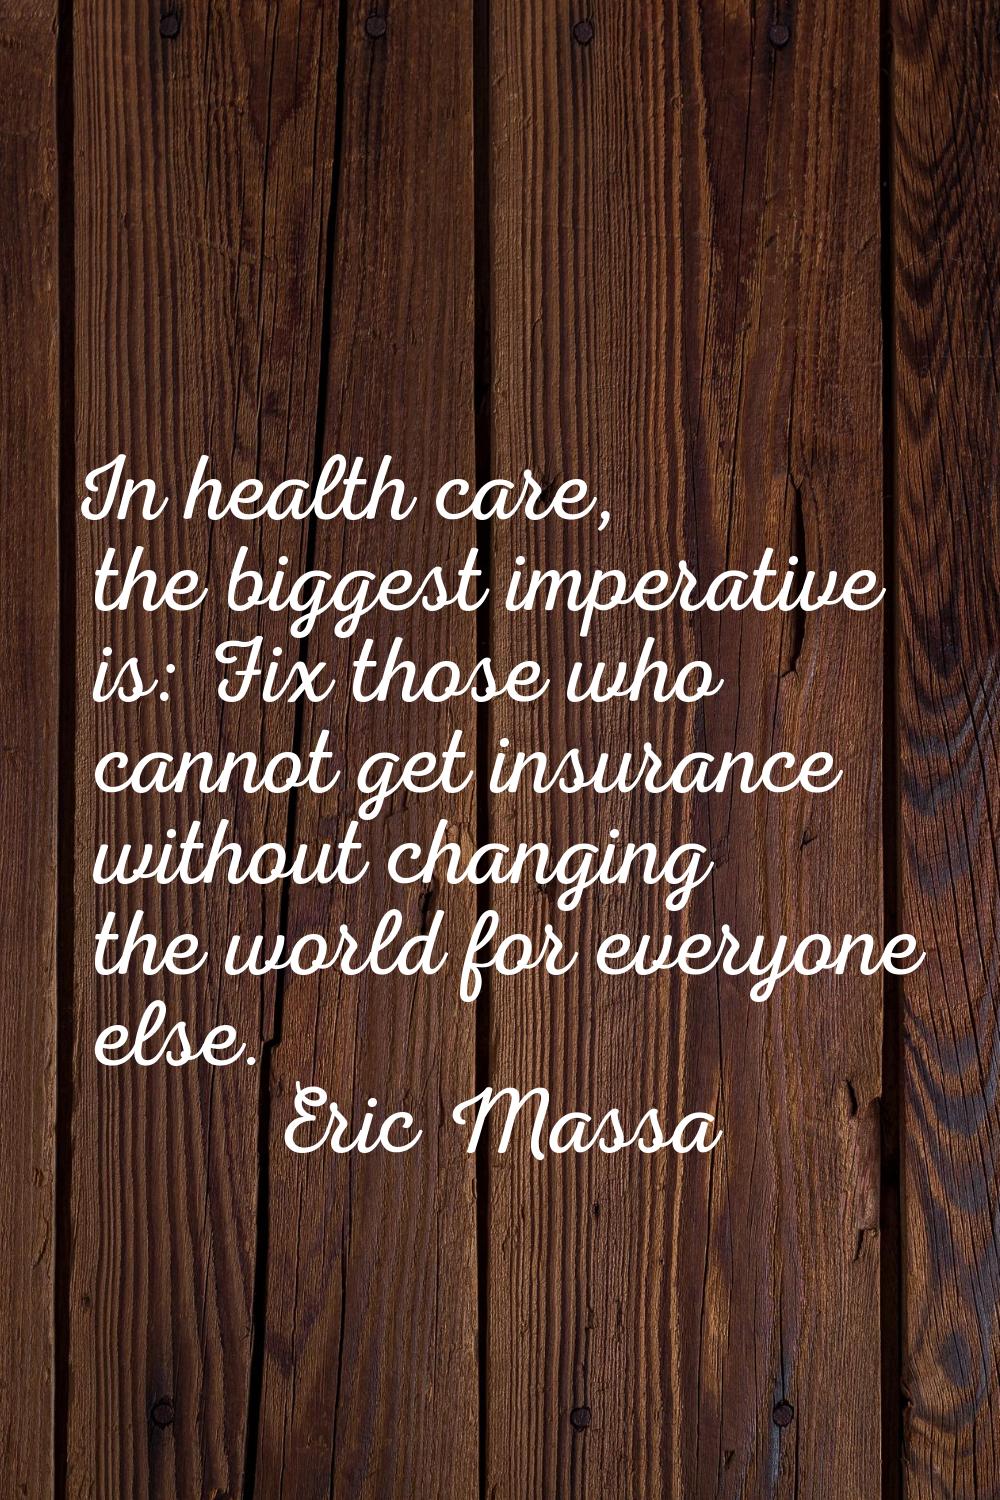 In health care, the biggest imperative is: Fix those who cannot get insurance without changing the 